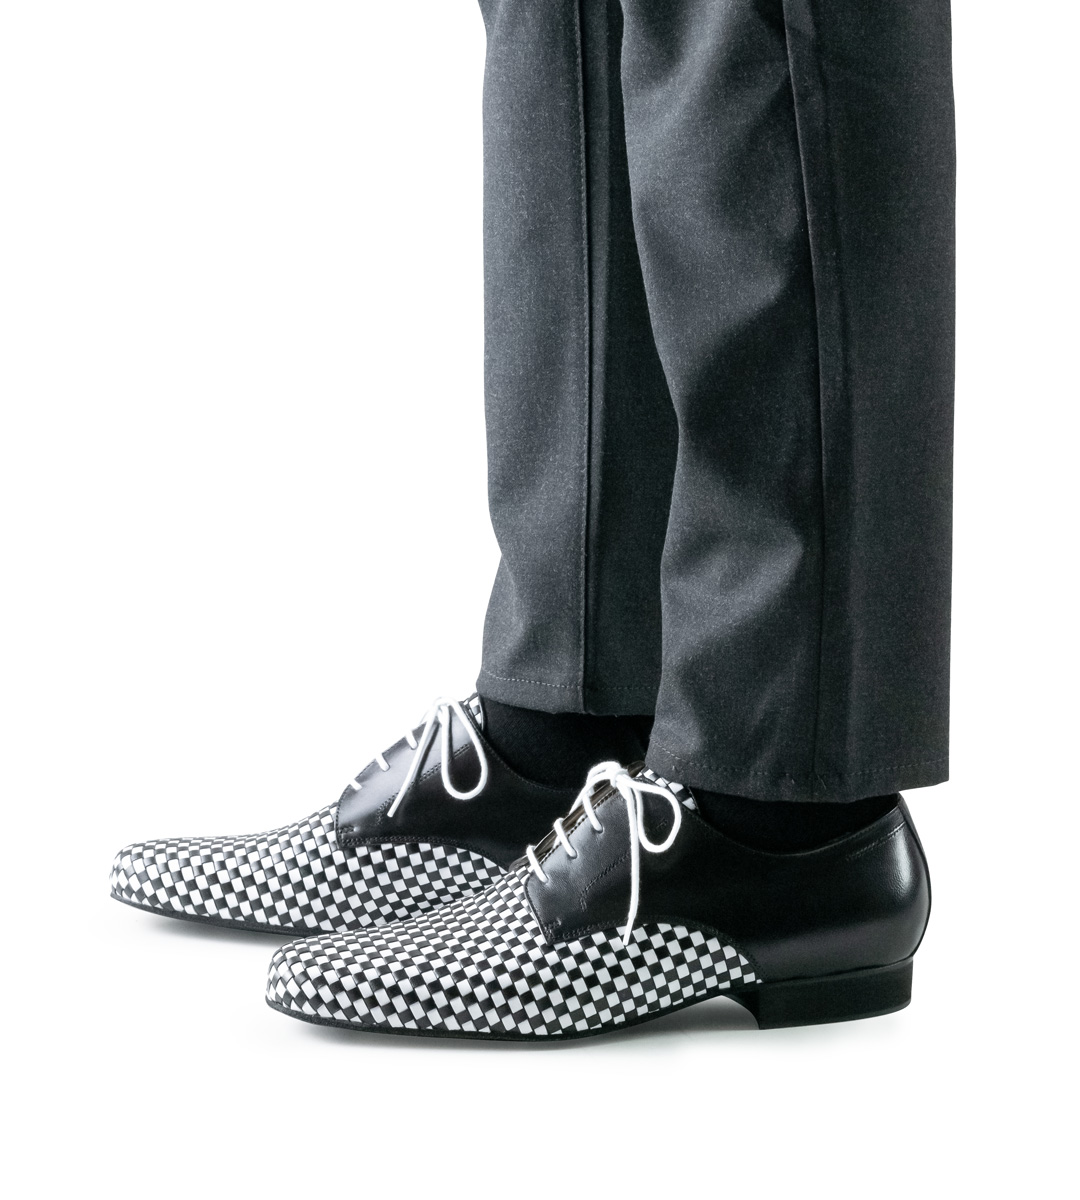 Braided men's dance shoe by Nueva Epoca in combination with grey trousers